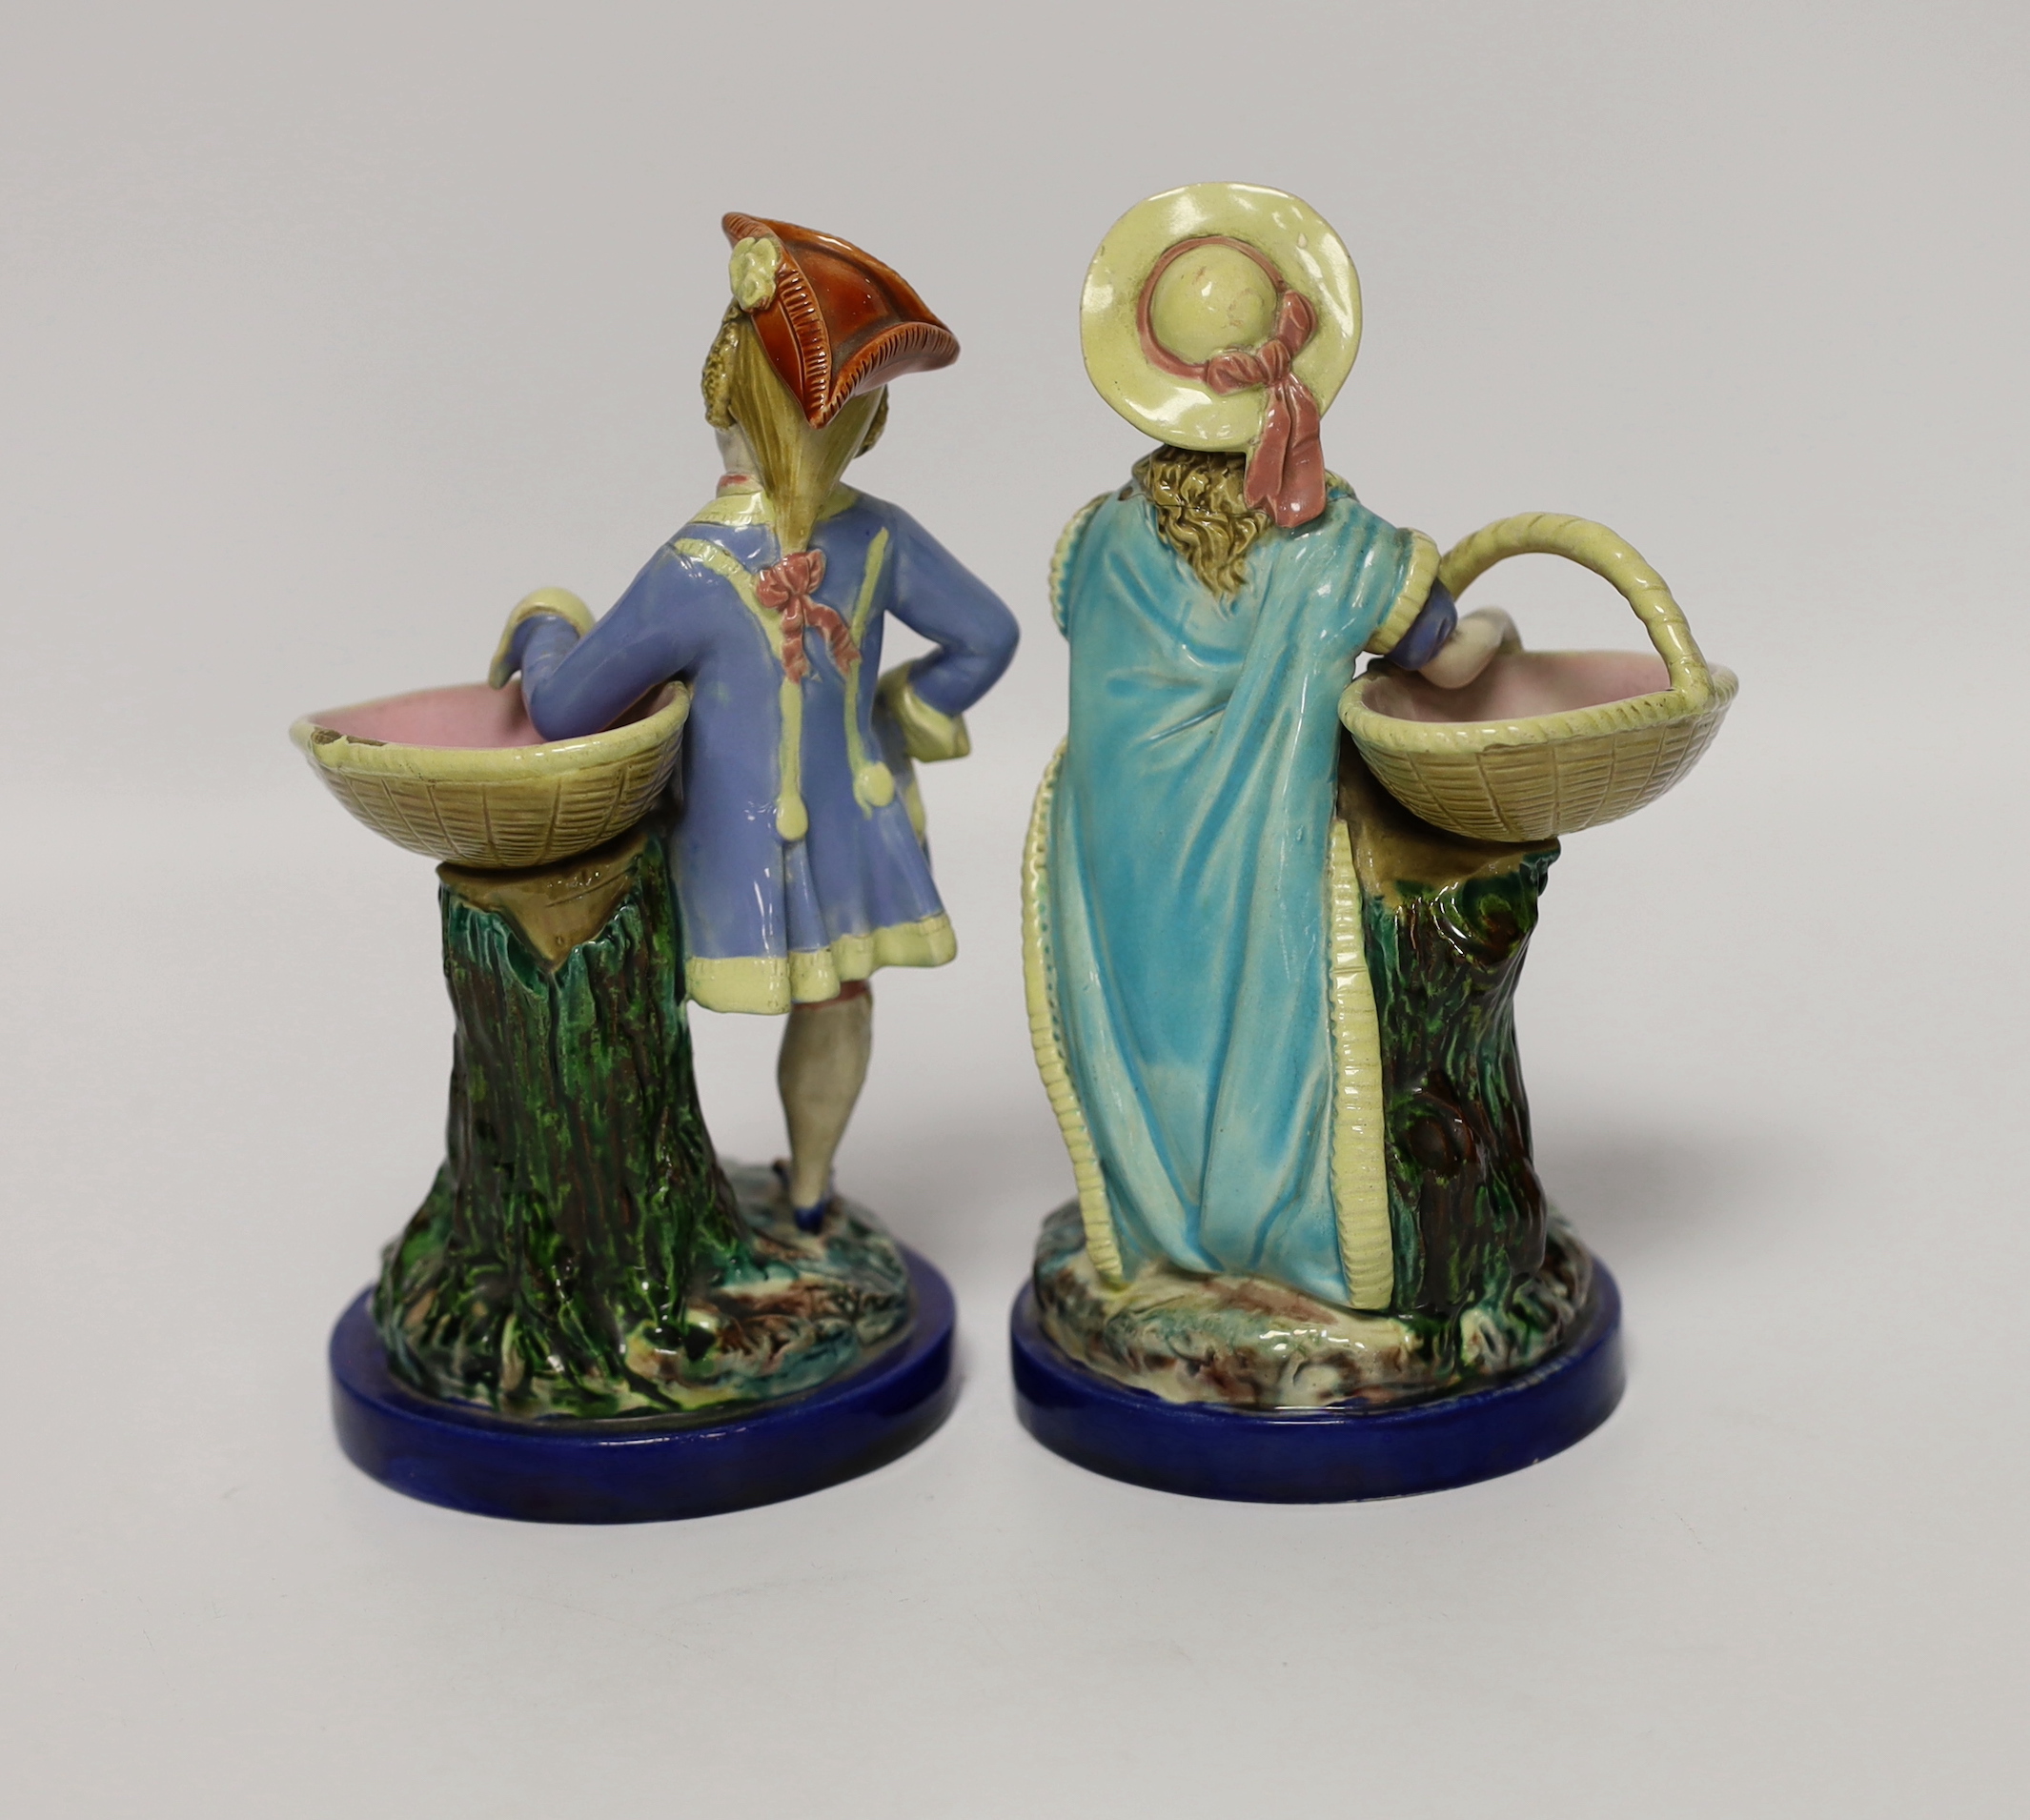 A pair of 19th century Worcester majolica figures holding baskets, largest 17cm high